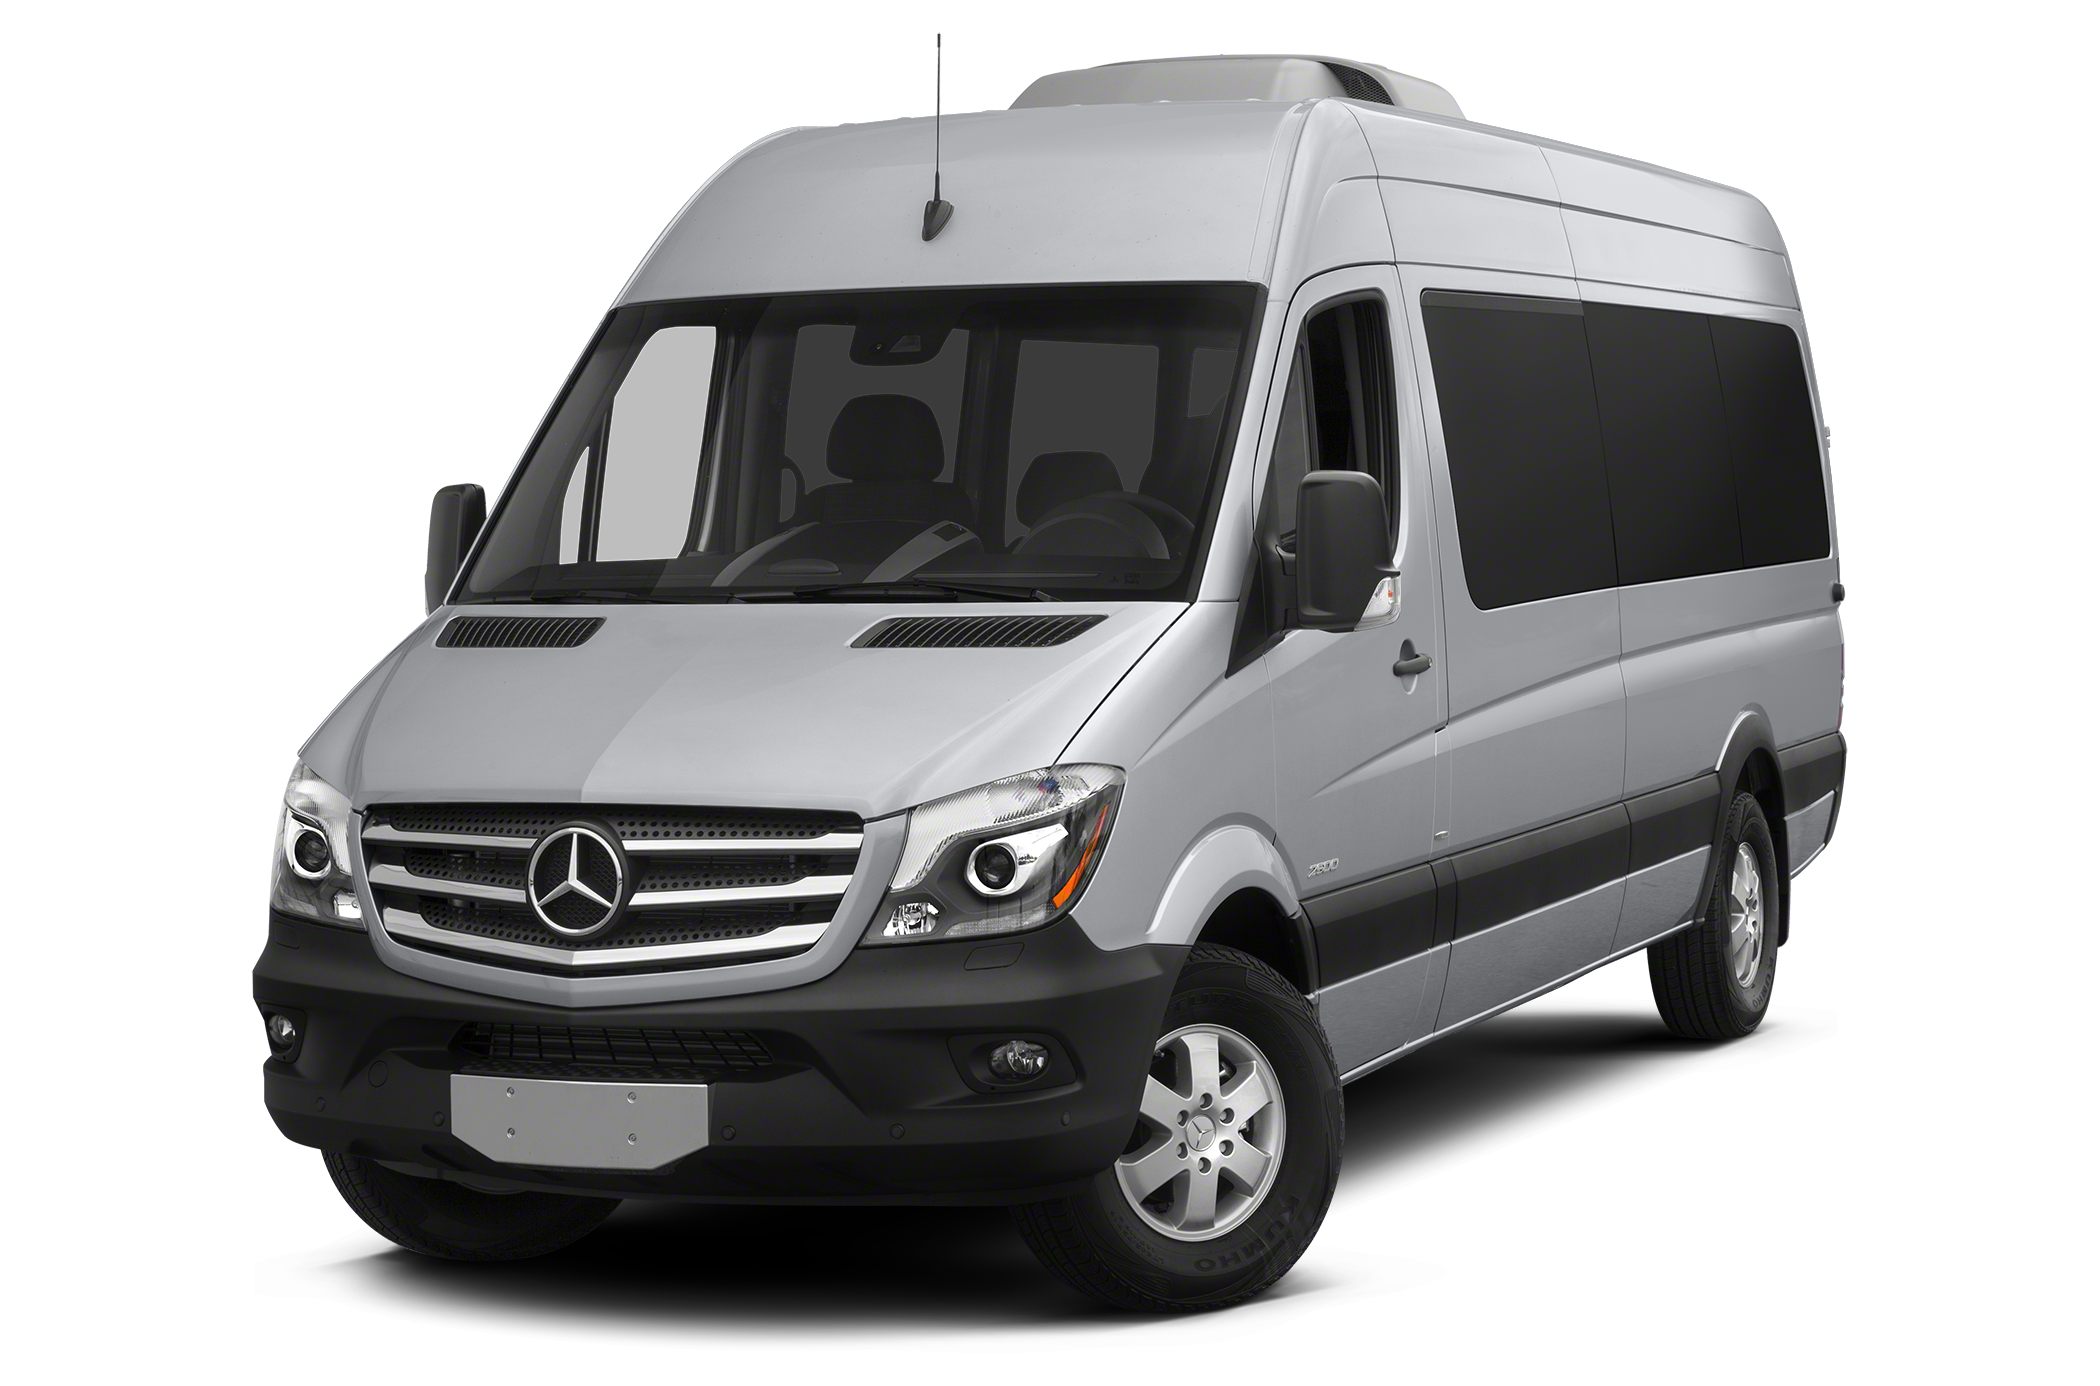 2018 Mercedes-Benz Sprinter 2500 High Roof V6 Sprinter 2500 Passenger Van  170 in. WB Rear-wheel Drive Specs and Prices